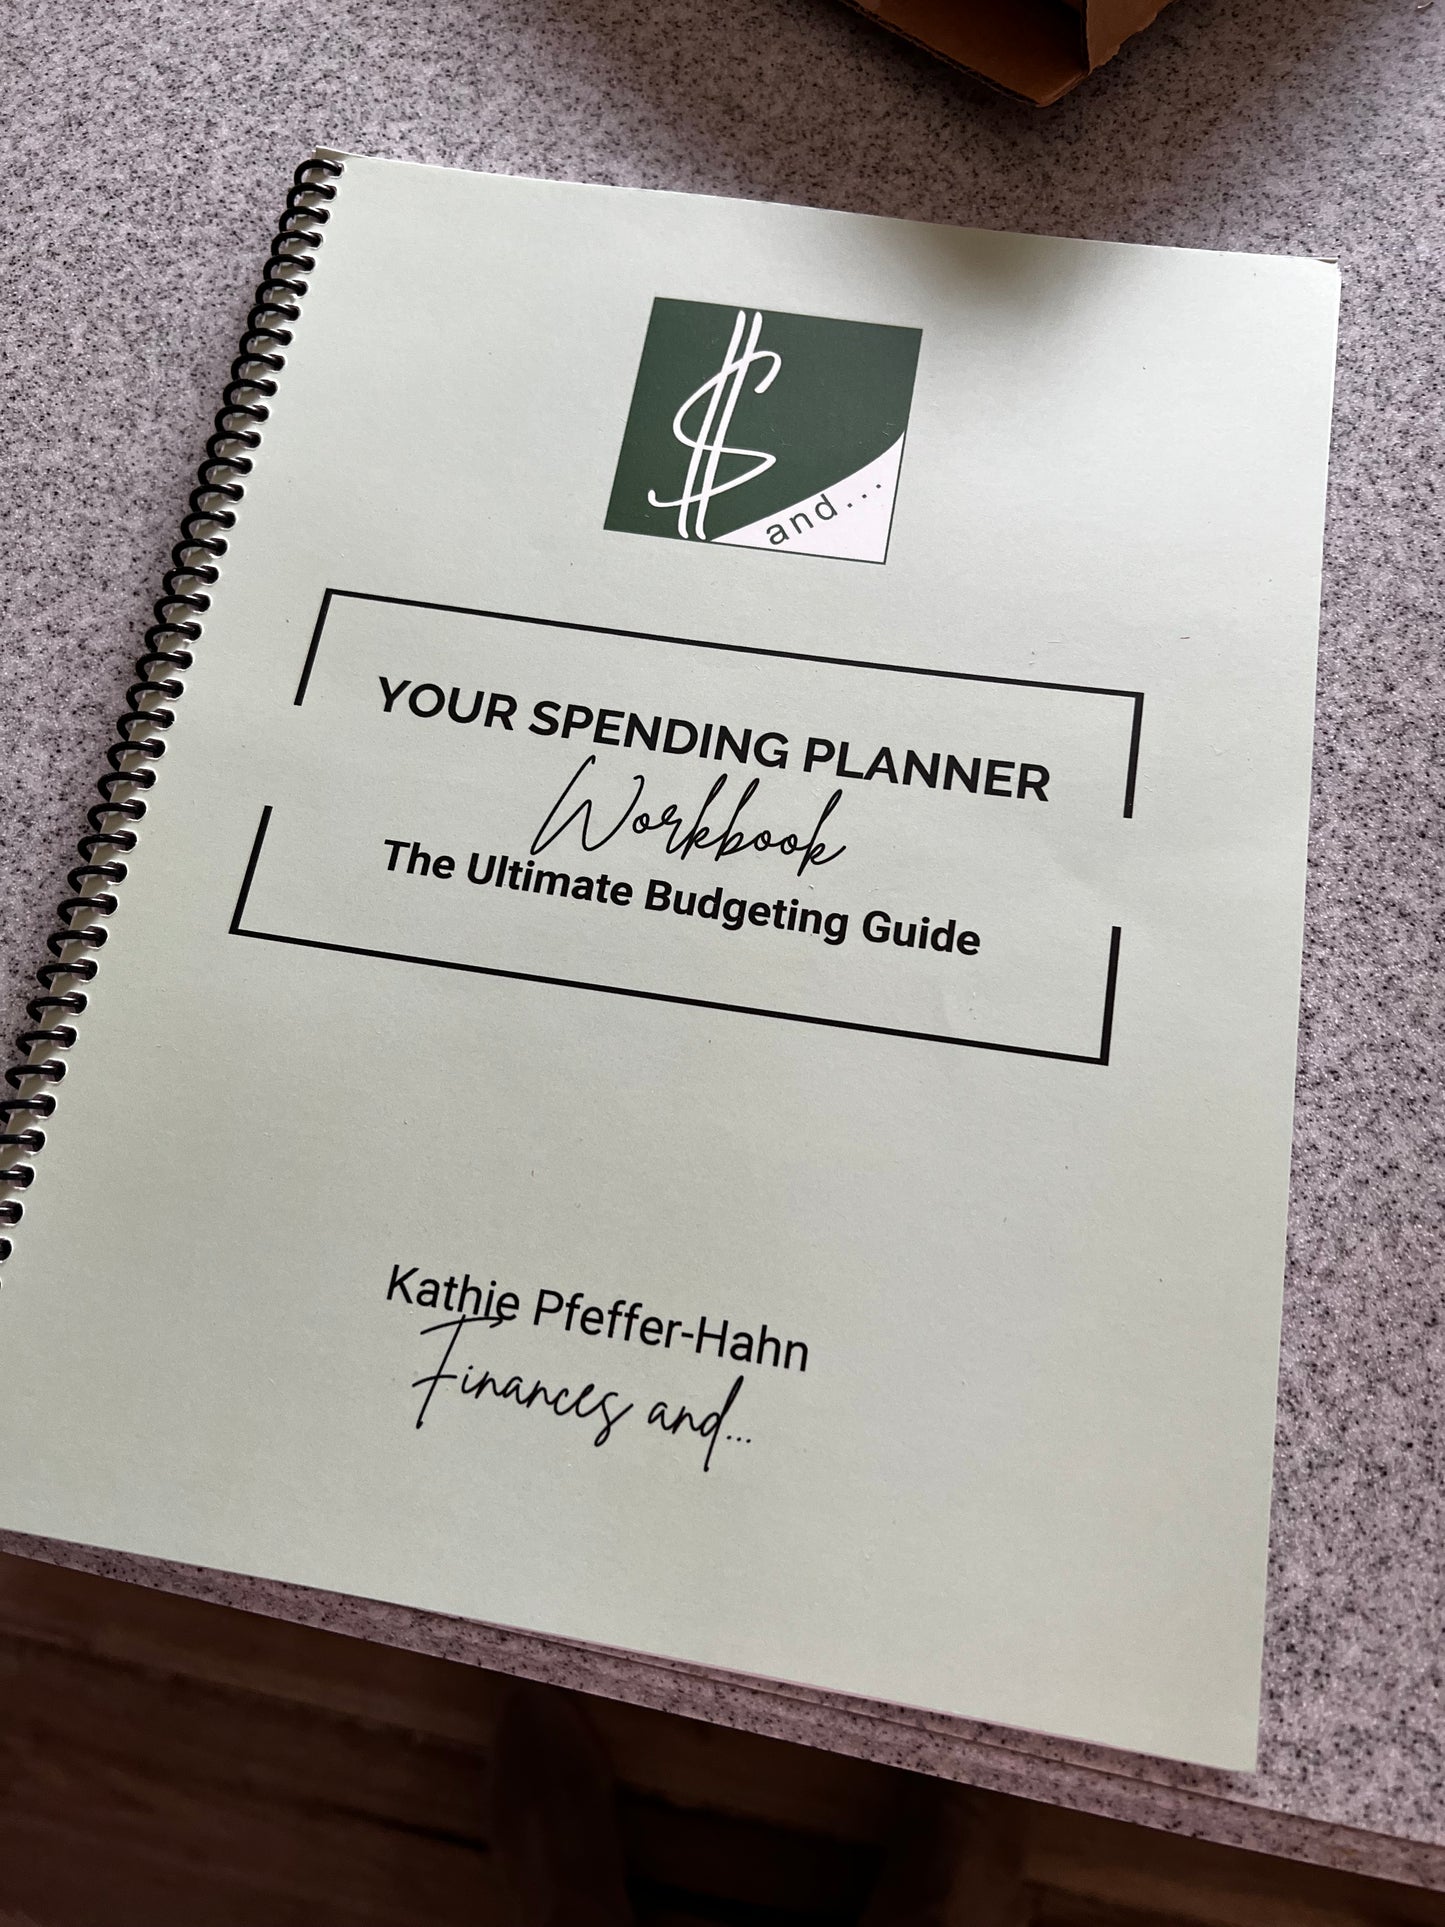 Finances and... Your Spending Planner Workbook